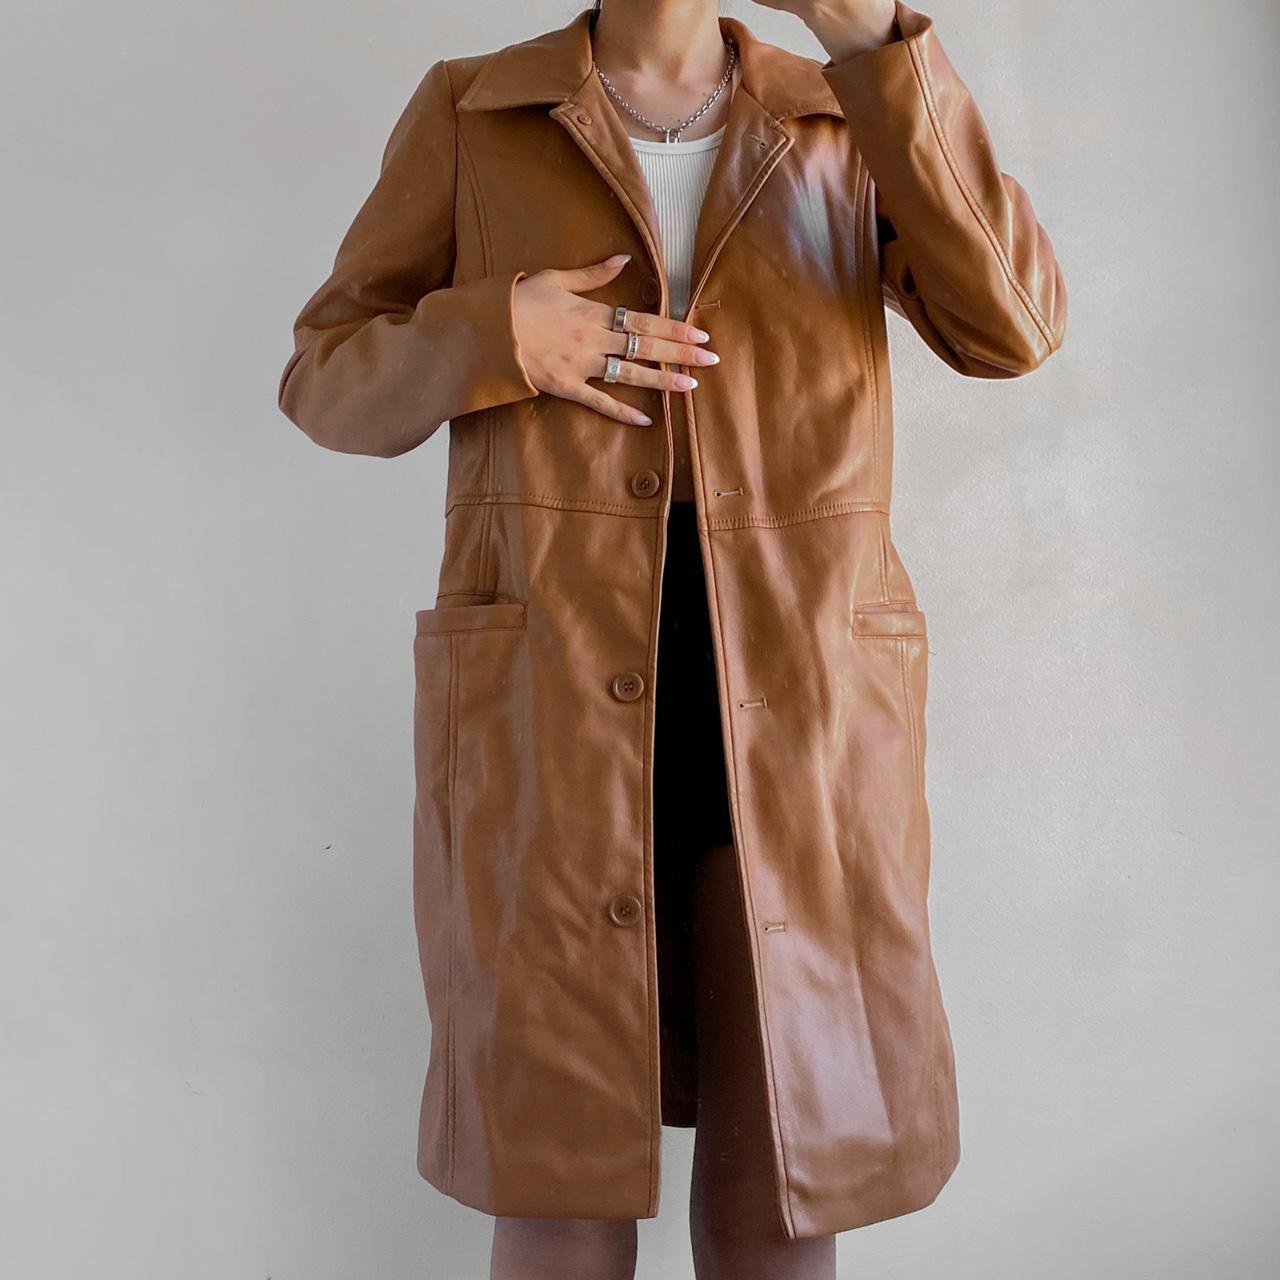 Urban Outfitters Women's Brown and Tan Coat (2)